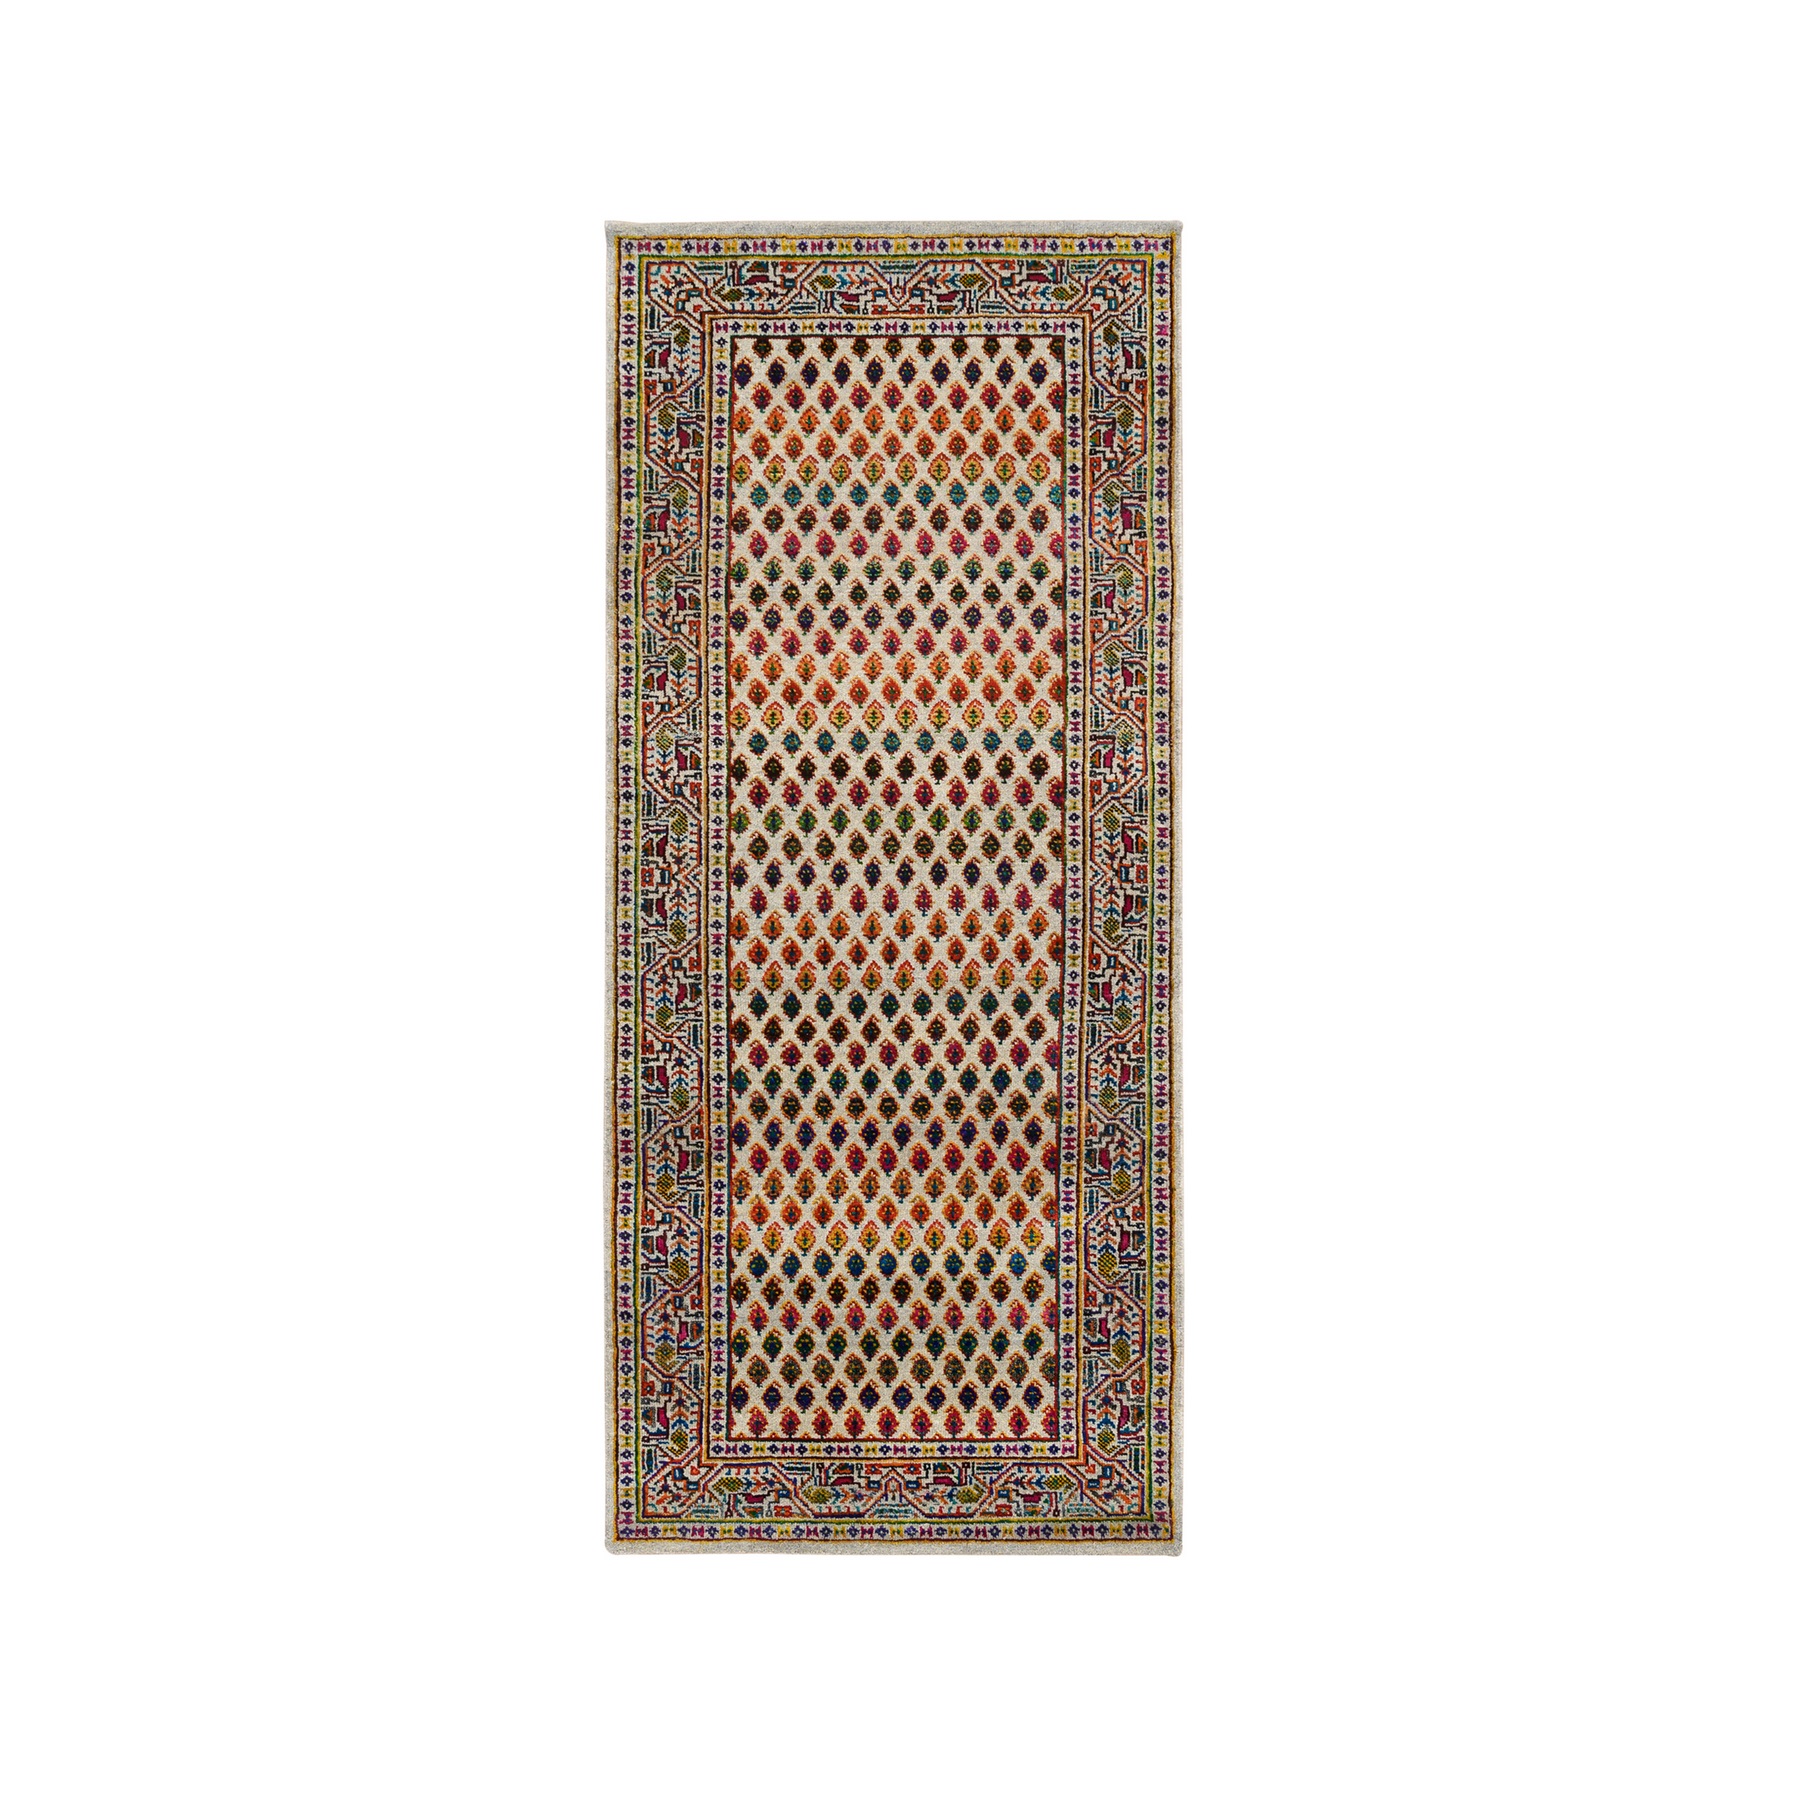 2'6"x6' Colorful Wool And Sari Silk Hand Woven Beige Sarouk Mir Inspired With Repetitive Boteh Design Oriental Runner Rug 